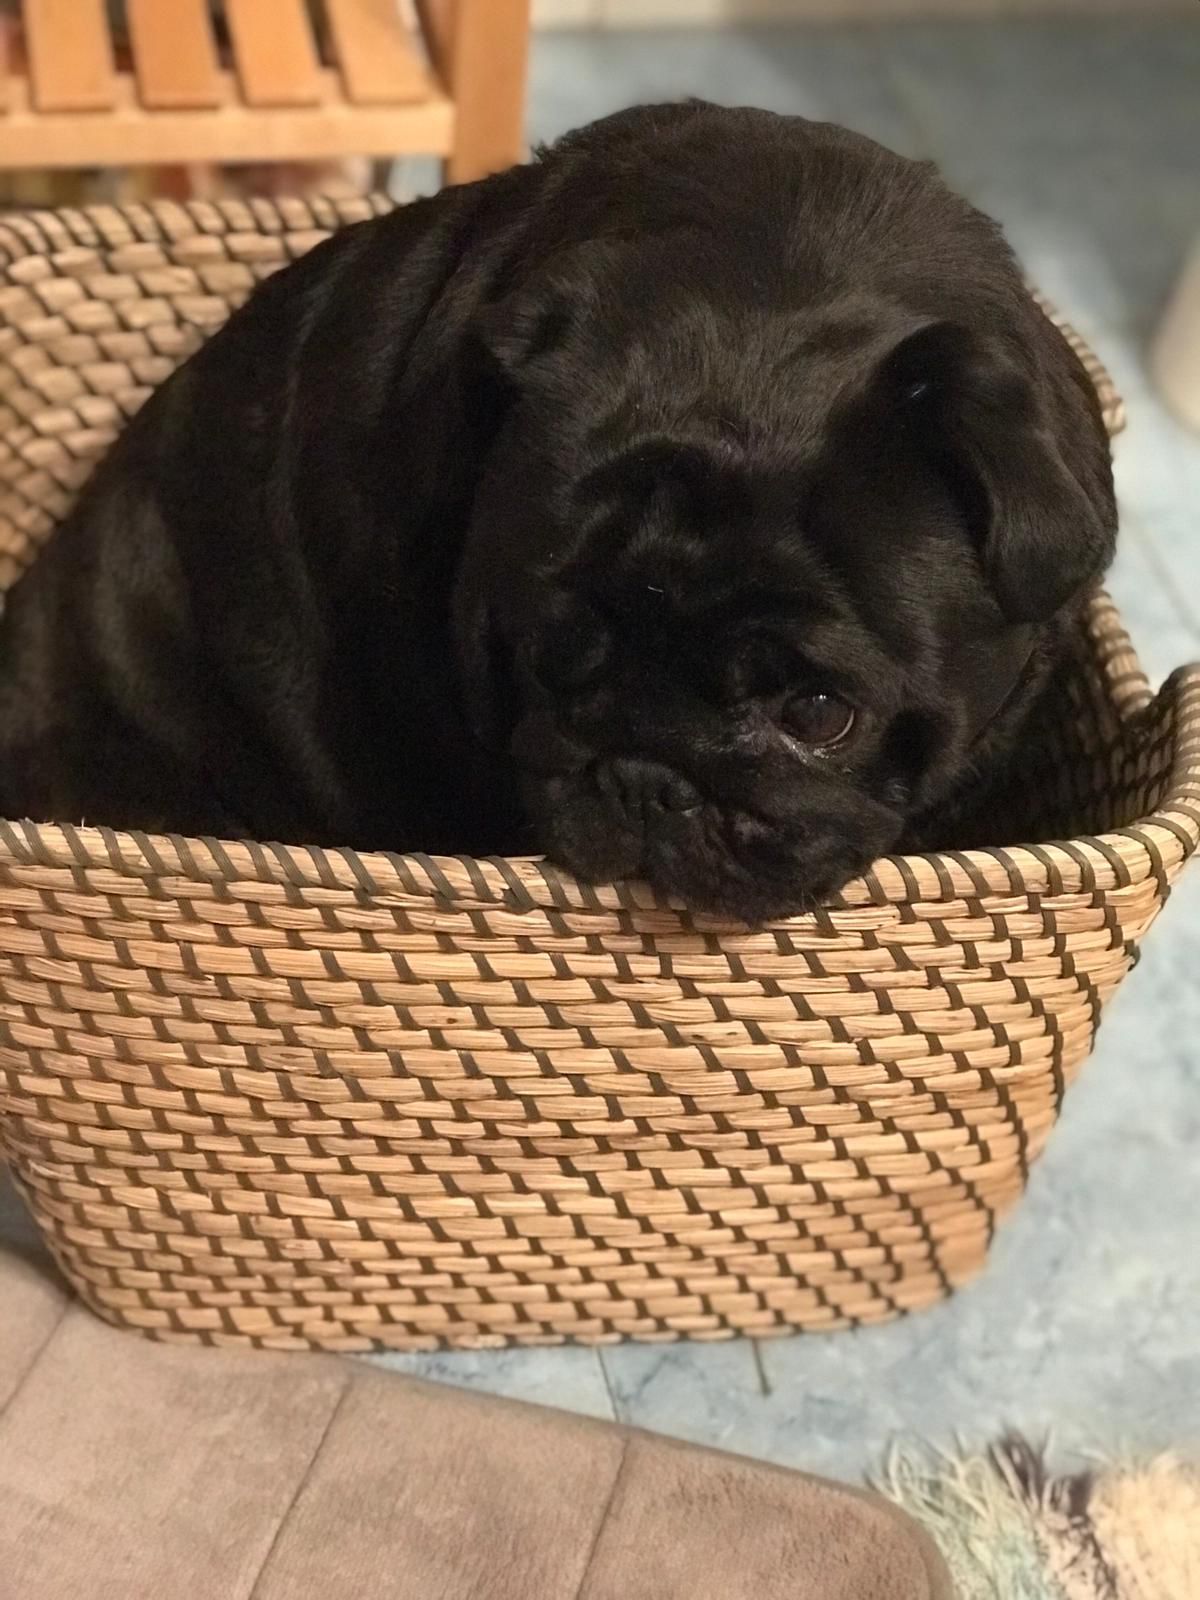 Photograph of cute pug puppy sitting in a basket